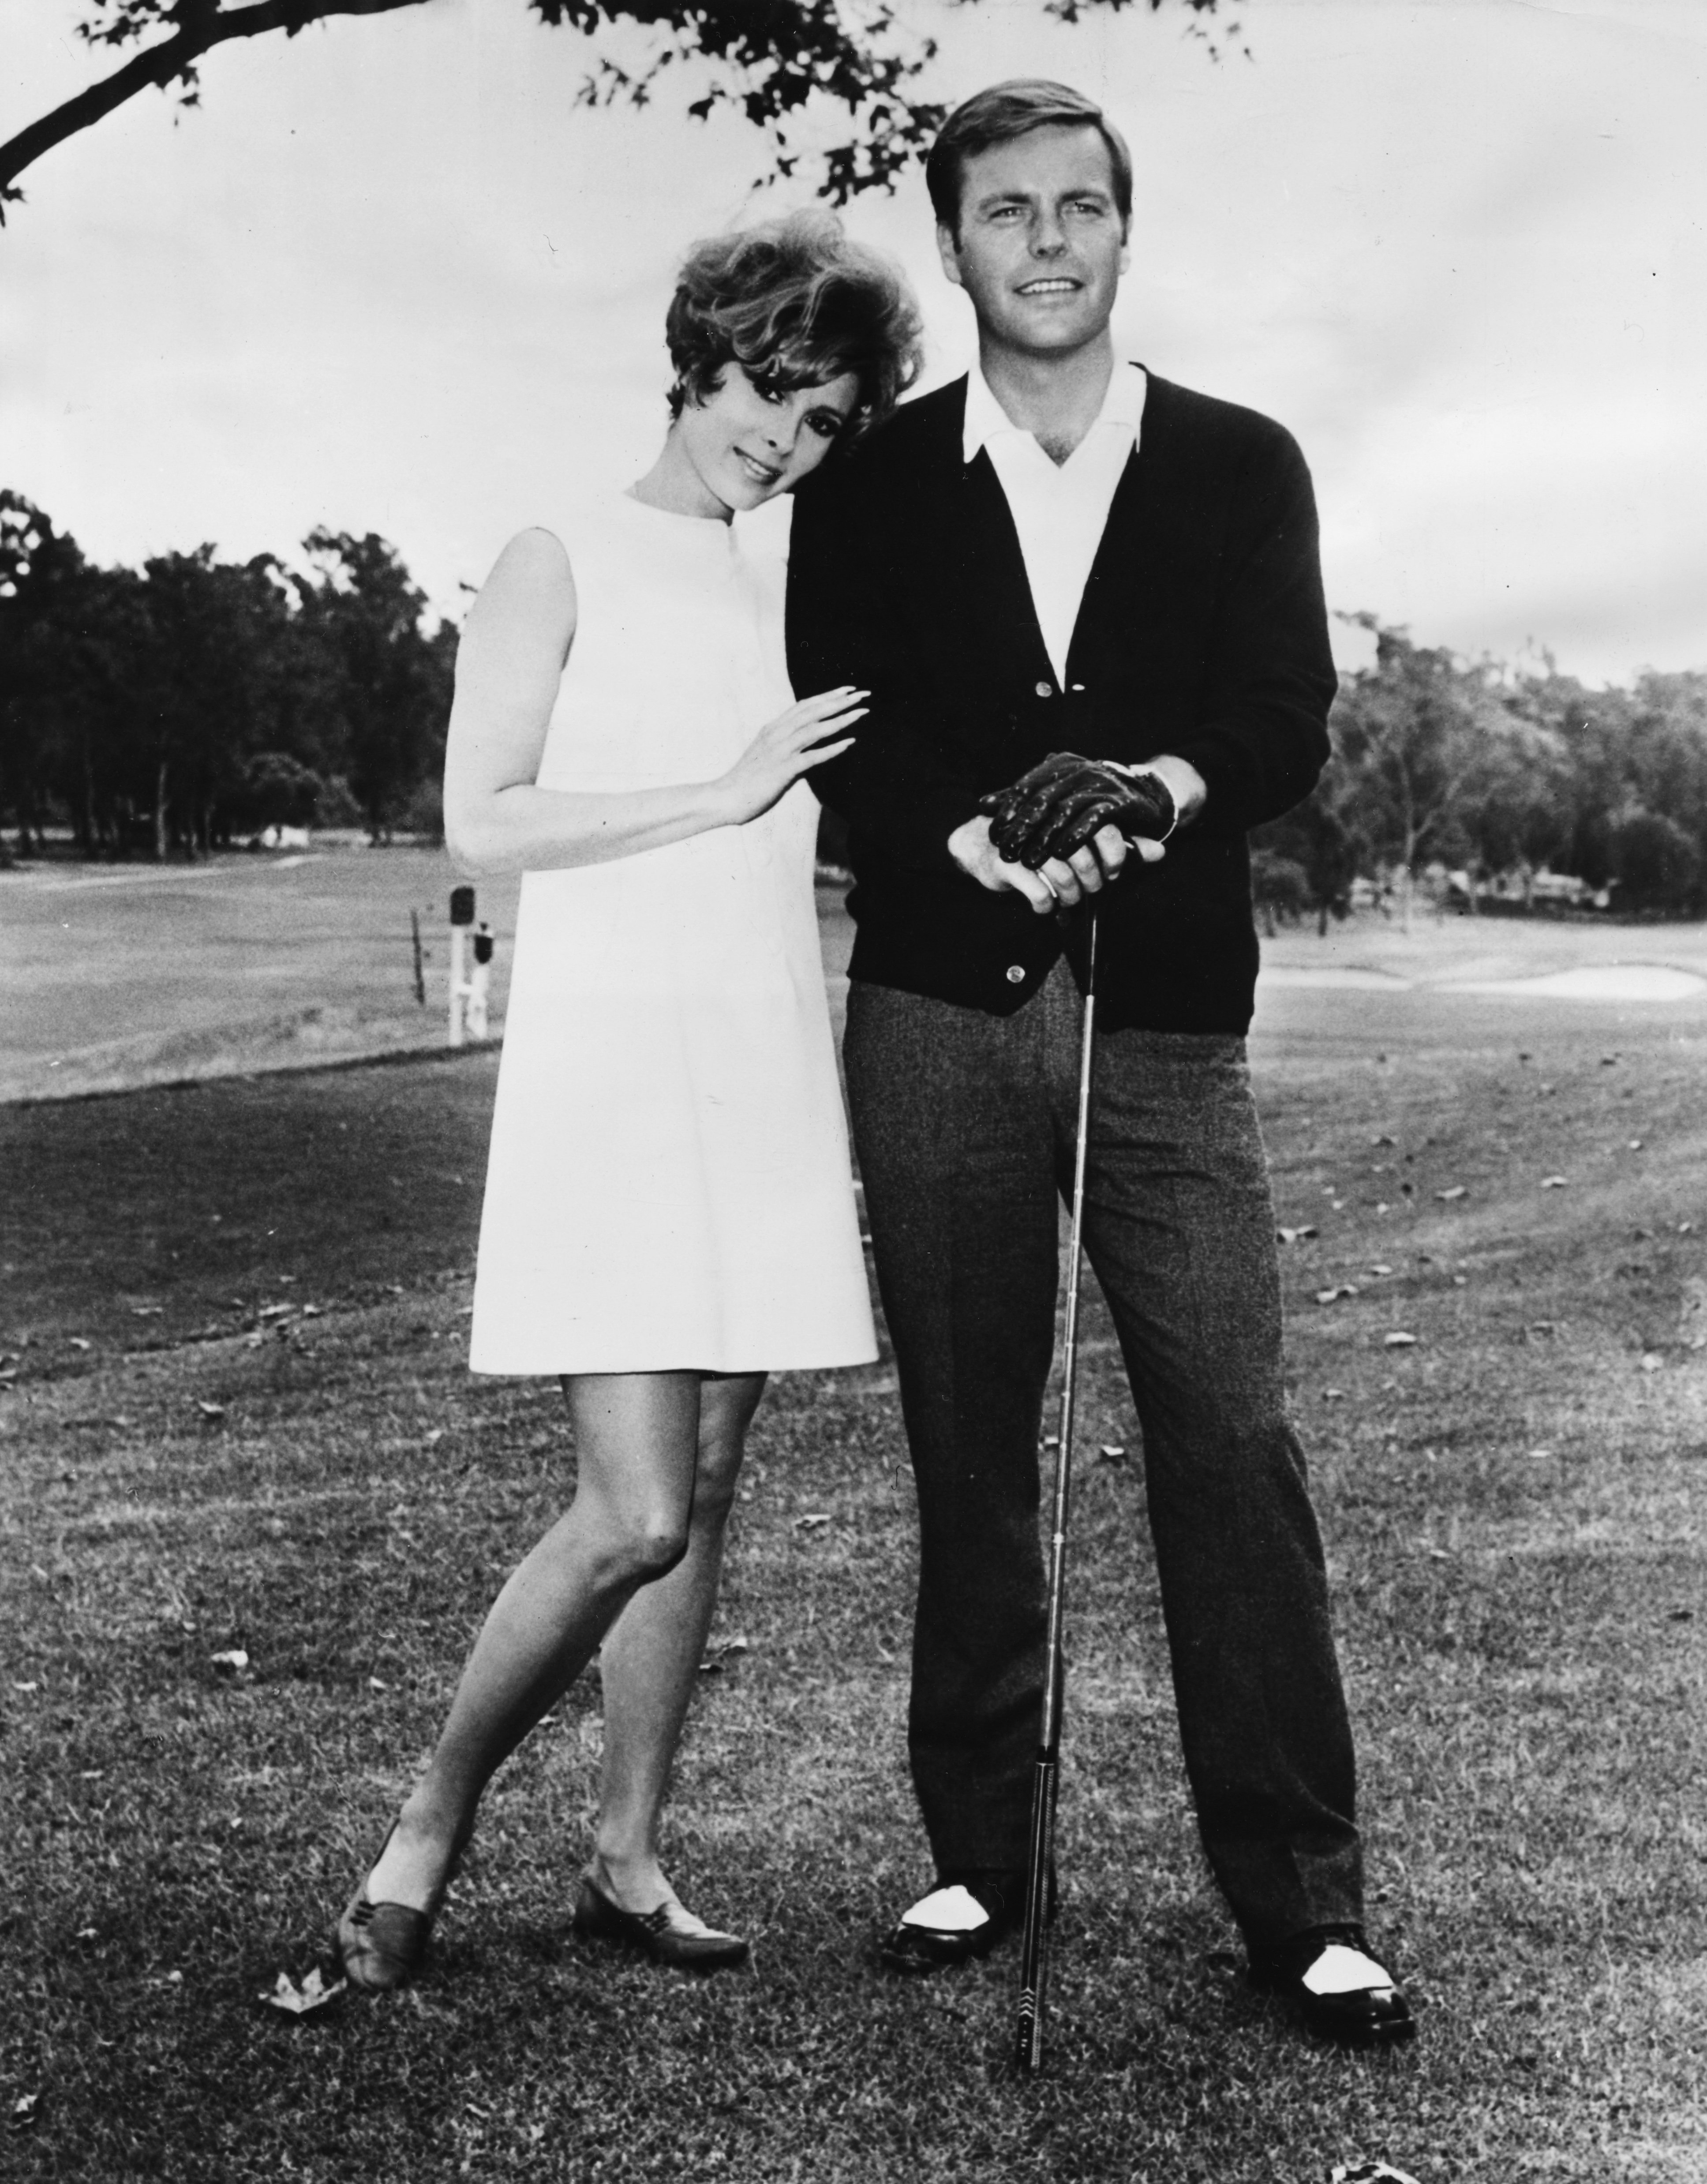 Jill St John giving moral support to actor Robert Wagner during a round of golf in Los Angeles, CA, January 7, 1967. | Source: Getty Images.